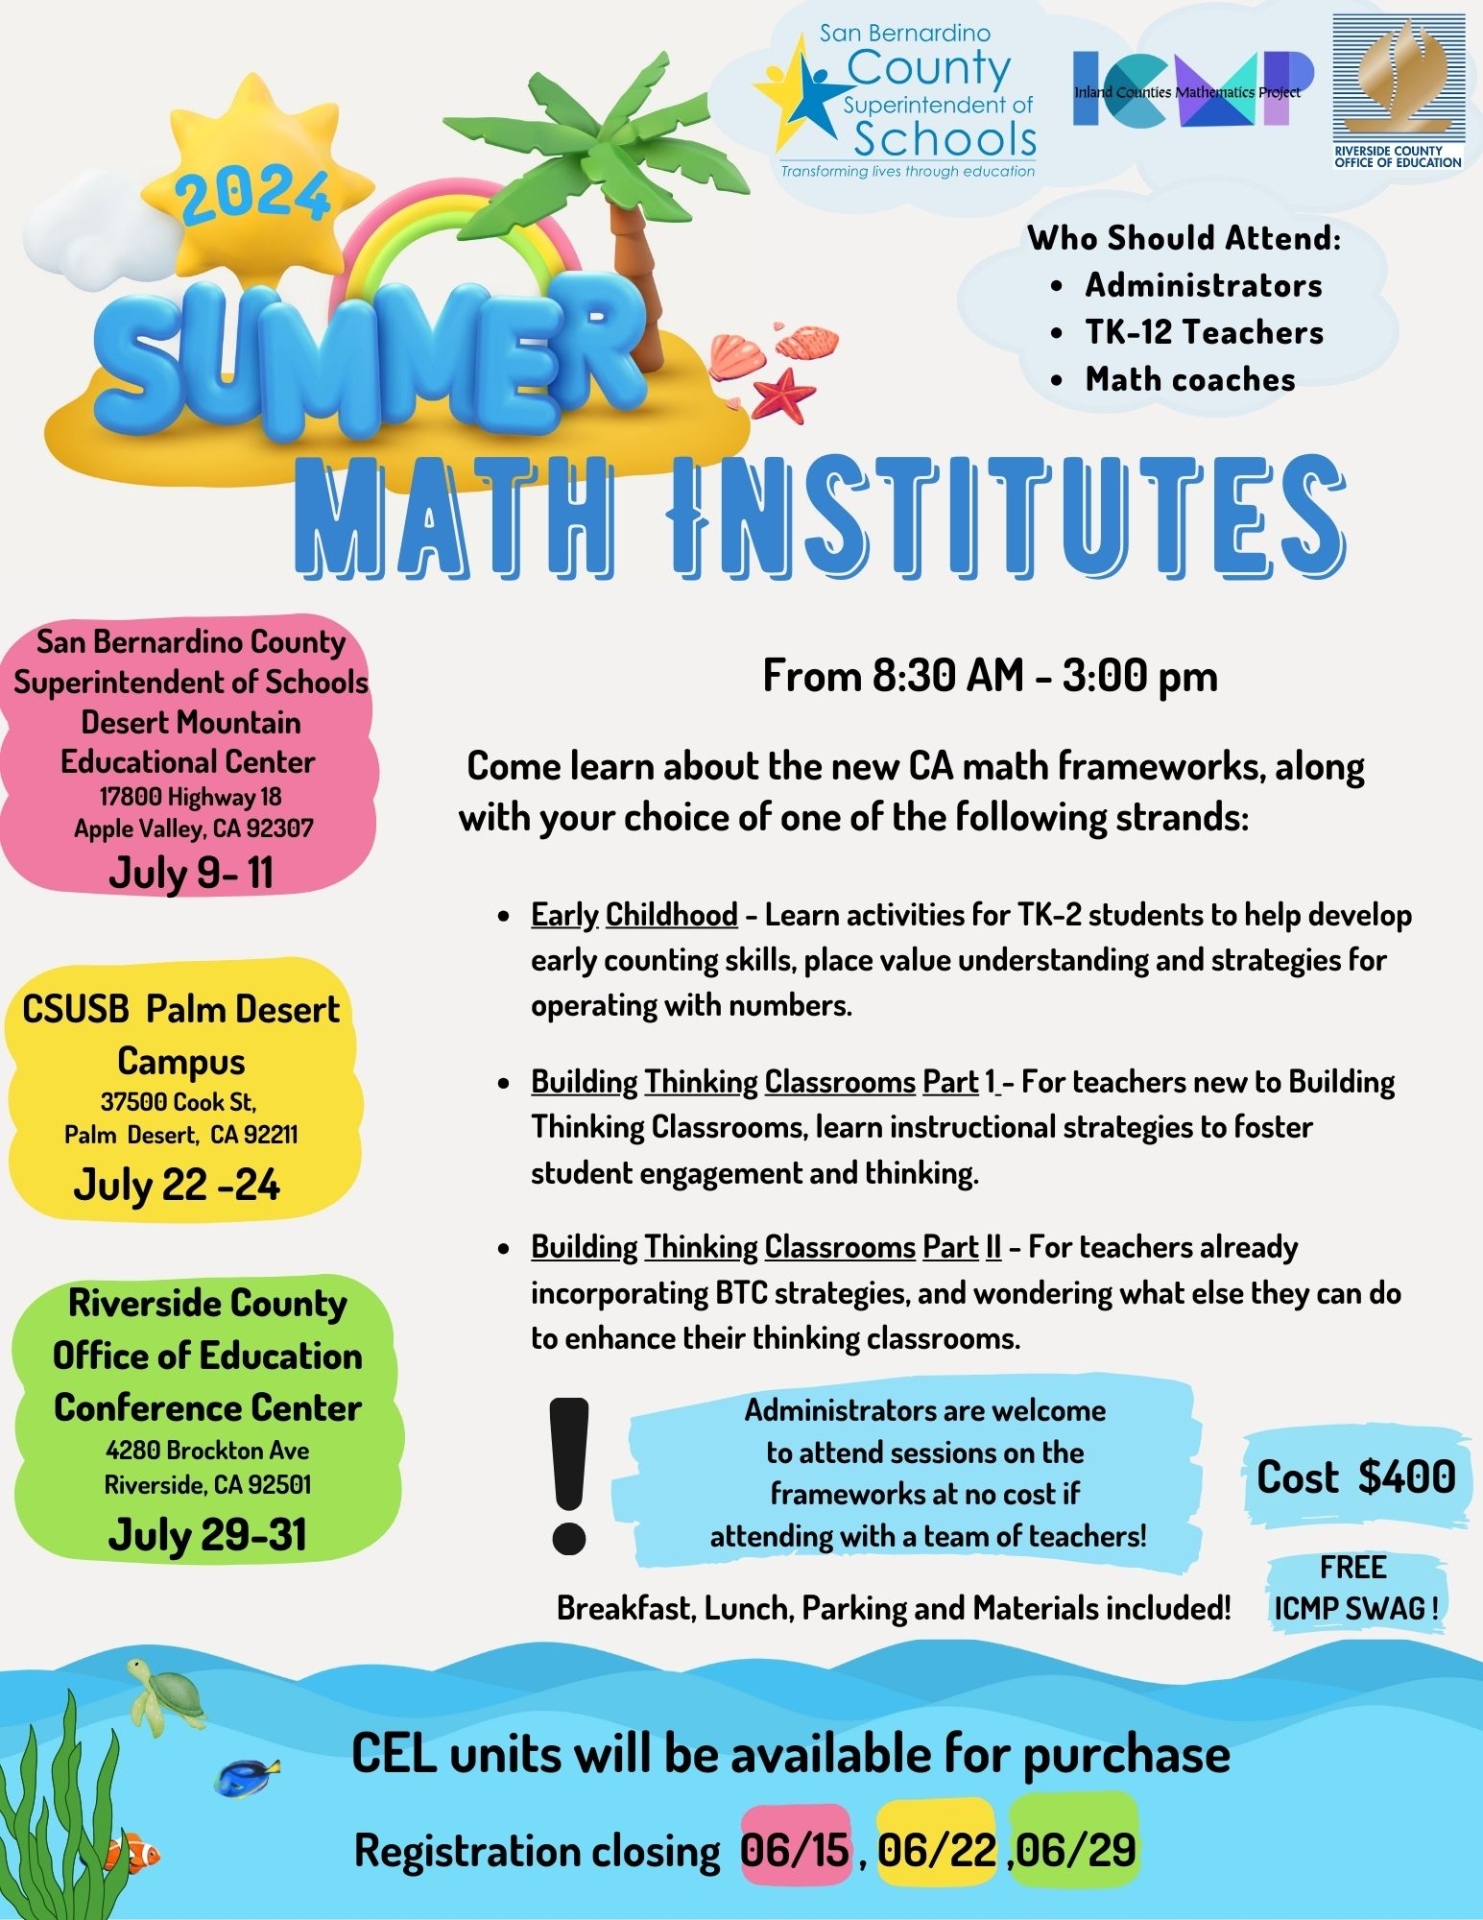 A description of the information for our summer institute.  Each day from 8:30 am to 3:00 pm. Event Description: This institute will explore teaching practices that support the development of student thinking in the math classroom Payment: $400 to cover parking, materials, refreshments, and lunch. Credit: 2 Math Units of College of Extended Global Education Credits are available for an additional cost. Registration Link: https://forms.gle/EbTKGVW9yCiJnjy4A